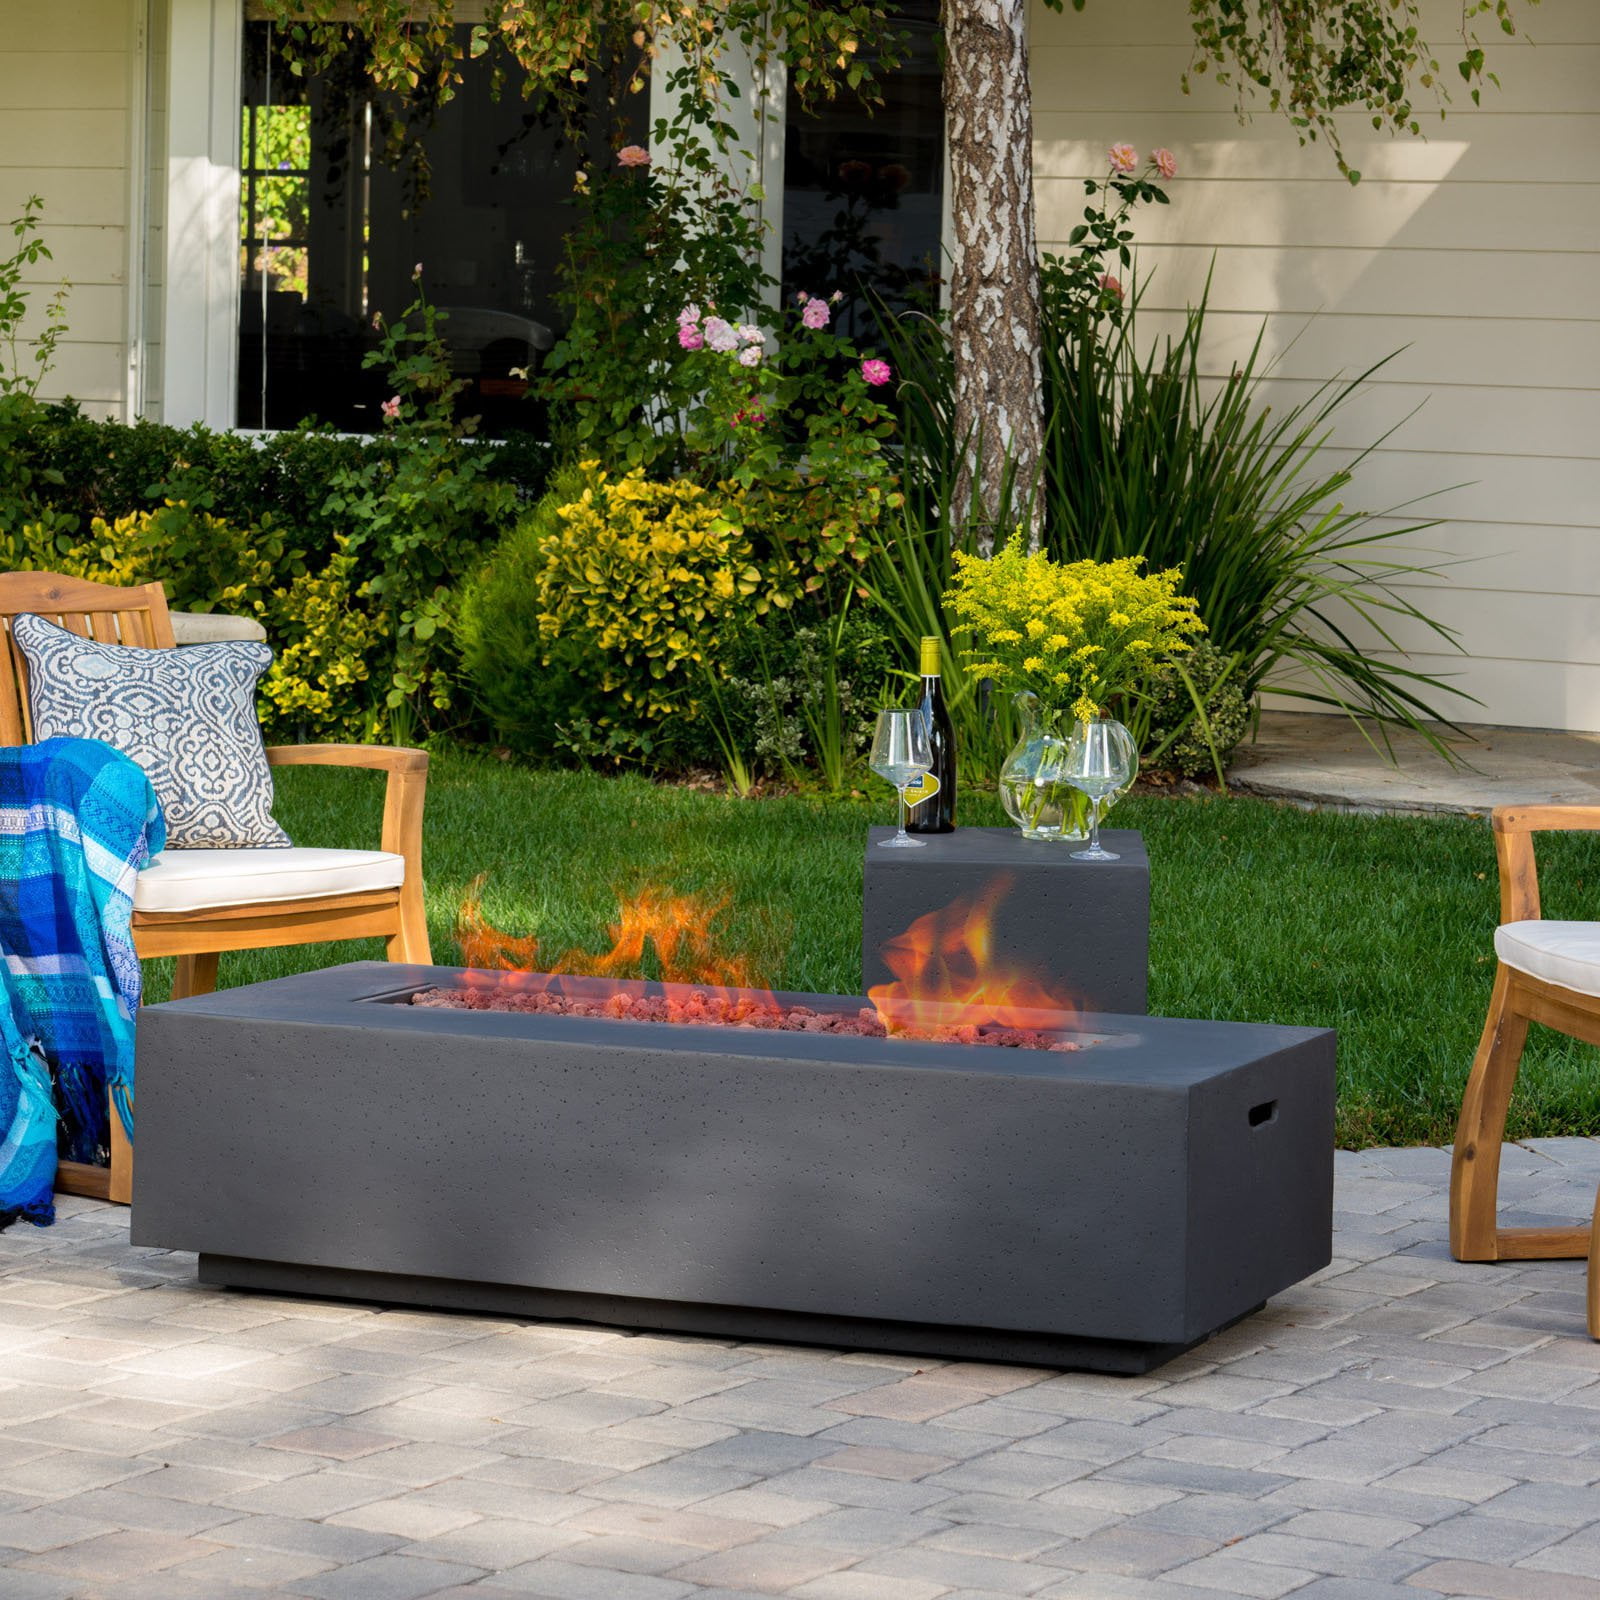 Amelia Propane Fire Pit Table Com, Hayneedle Fire Pit Table